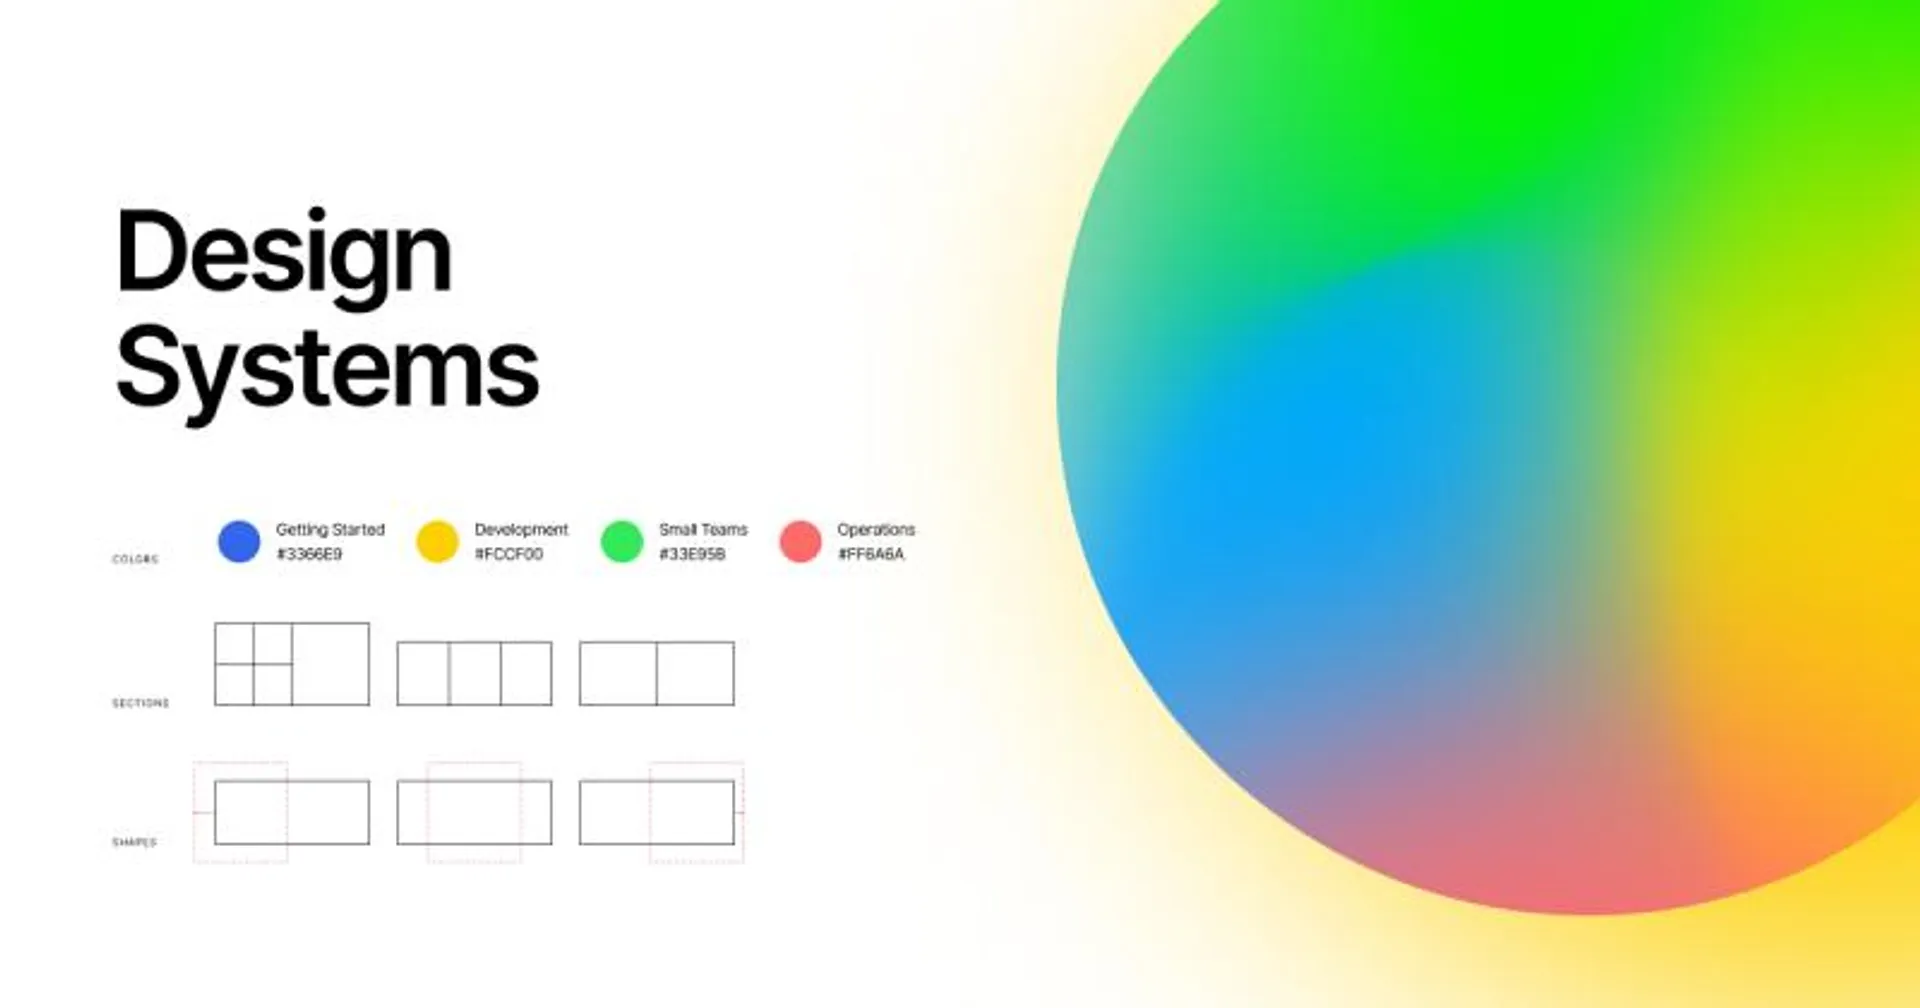 Designsystems.com by Figma is an amazing resource!

Not only does it teach the basics, but it also includes a list of designs systems within the Figma community that are open to all.

#DesignSystem #UX #ProductDesign

https://www.designsystems.com/